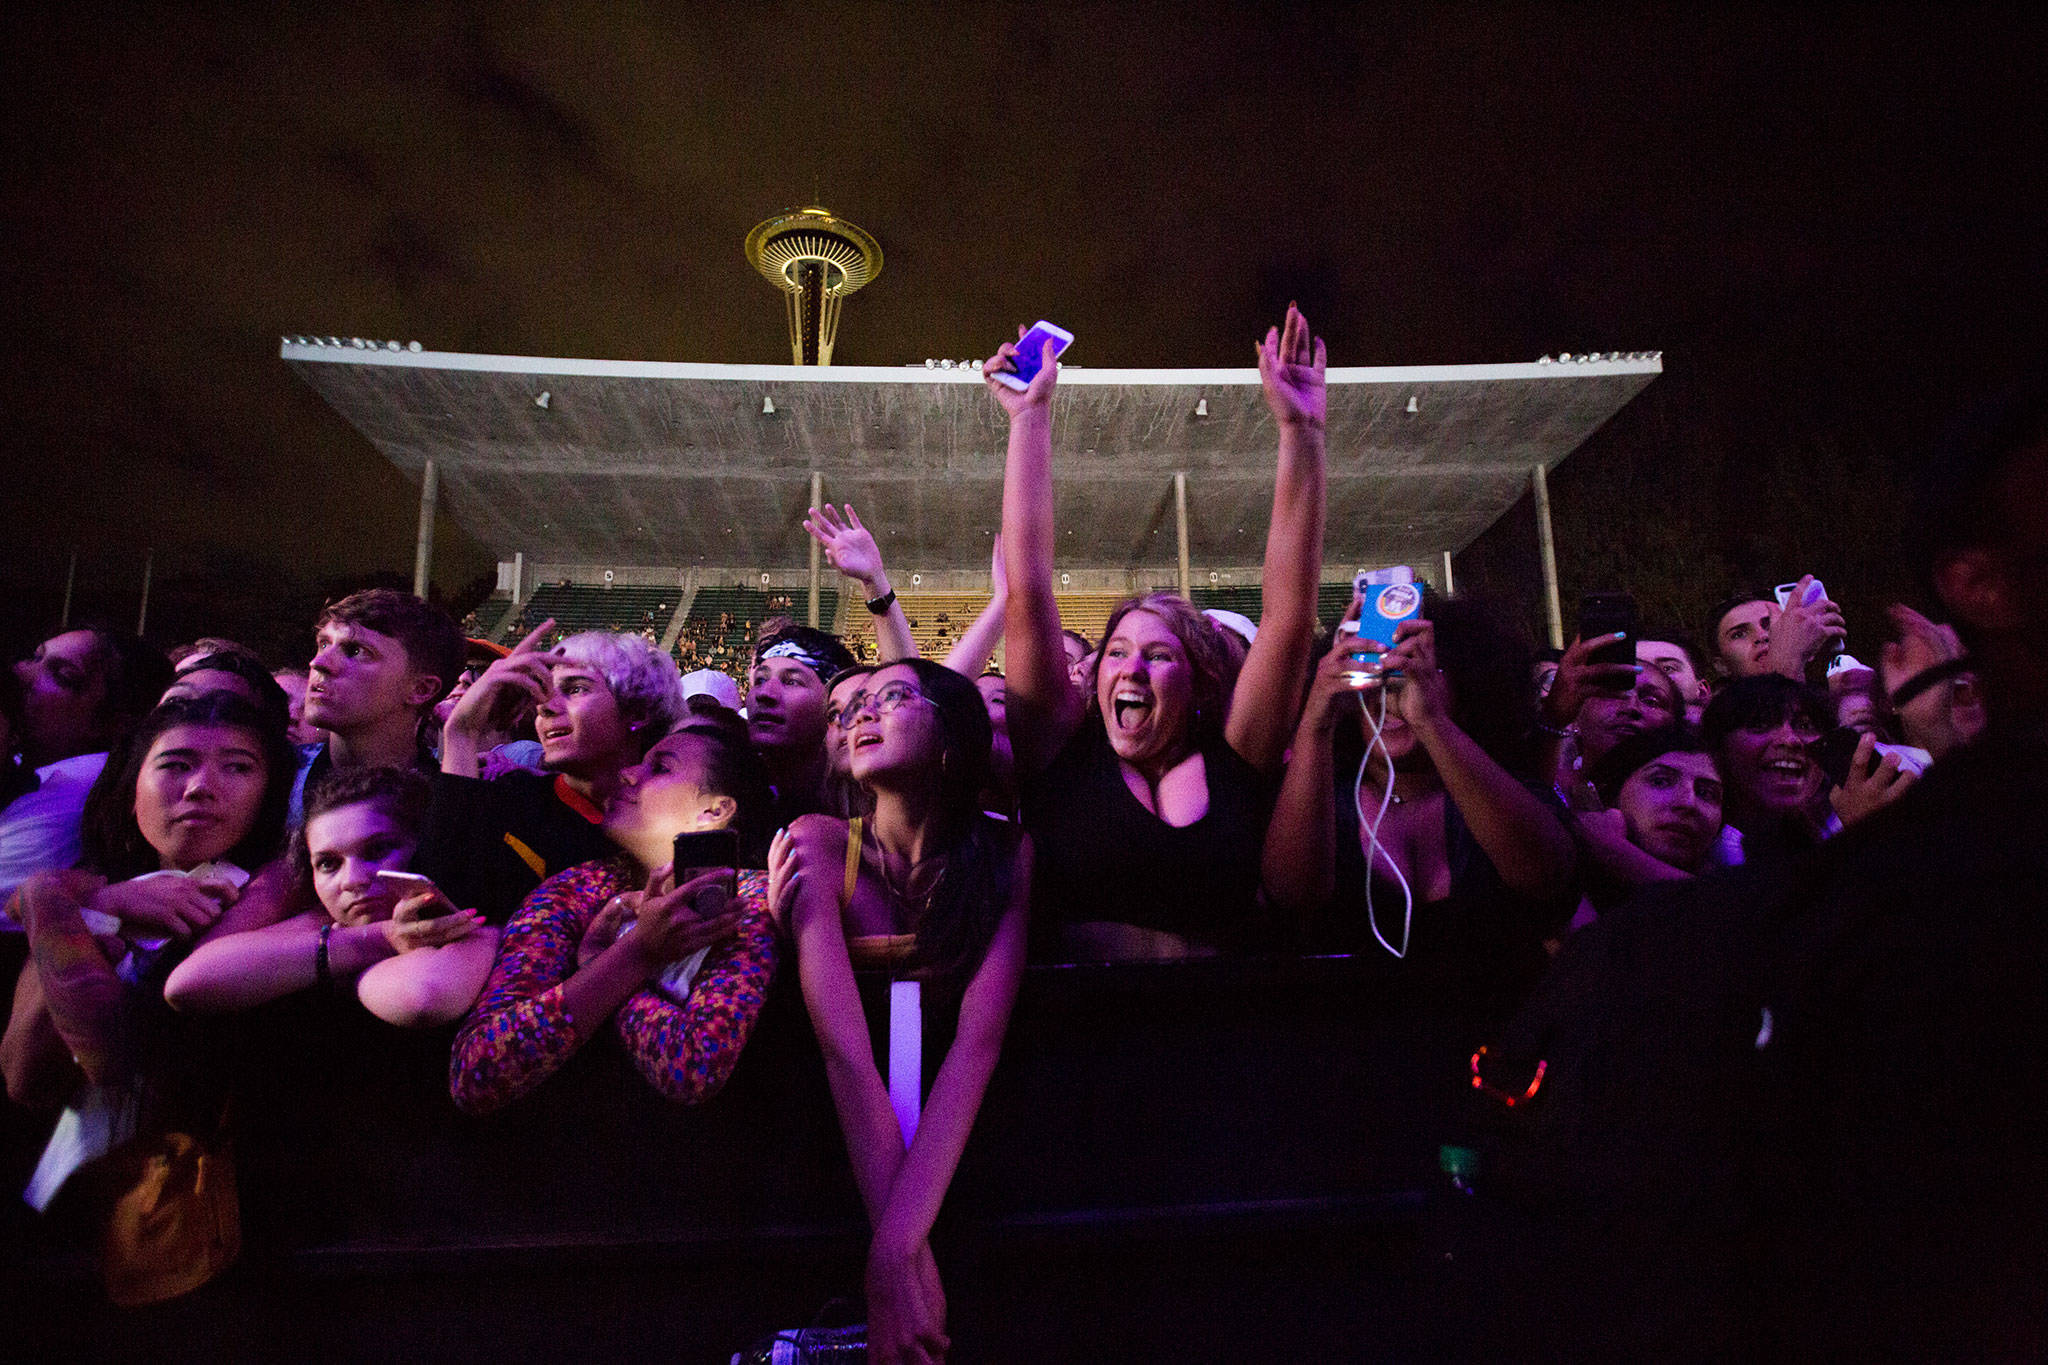 Fans scream as they see Tyler, The Creator take the stage at Bumbershoot Music & Arts Festival on Friday, Aug. 30, 2019 in Seattle, Wash. (Olivia Vanni / The Herald)